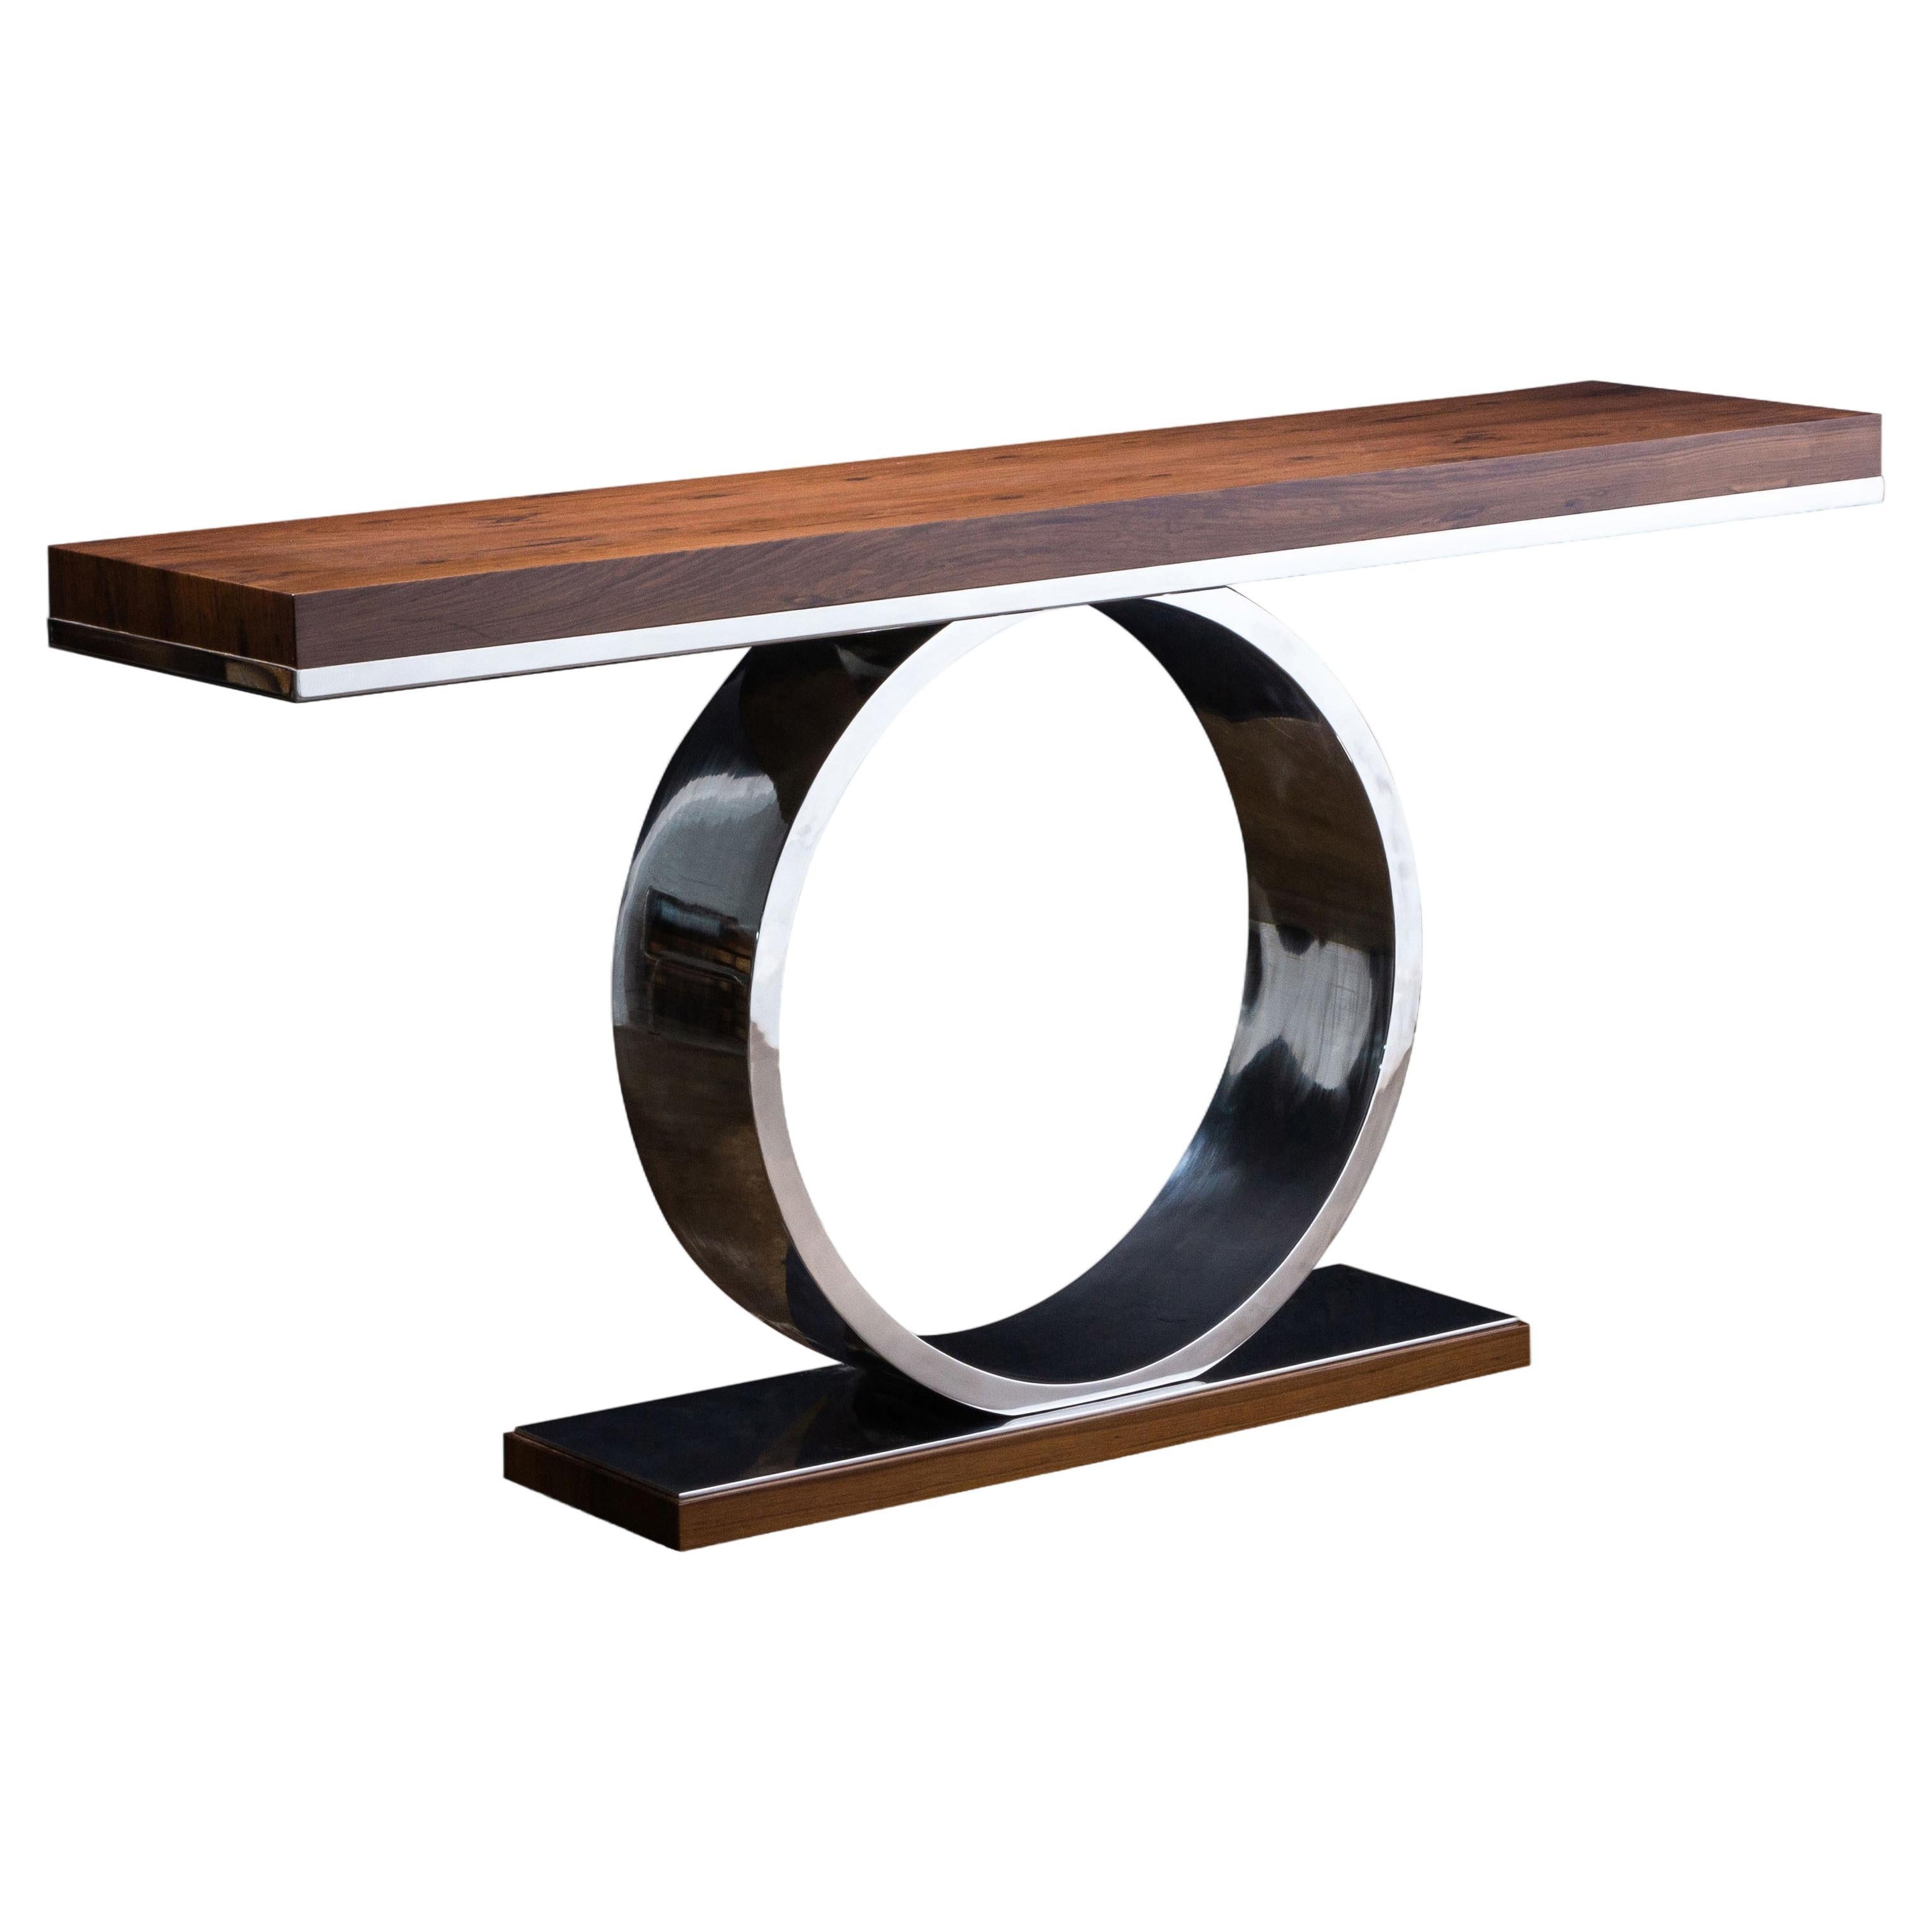 Modern Sculptural Polished Steel and Wood Console Table from Costantini, Donte 